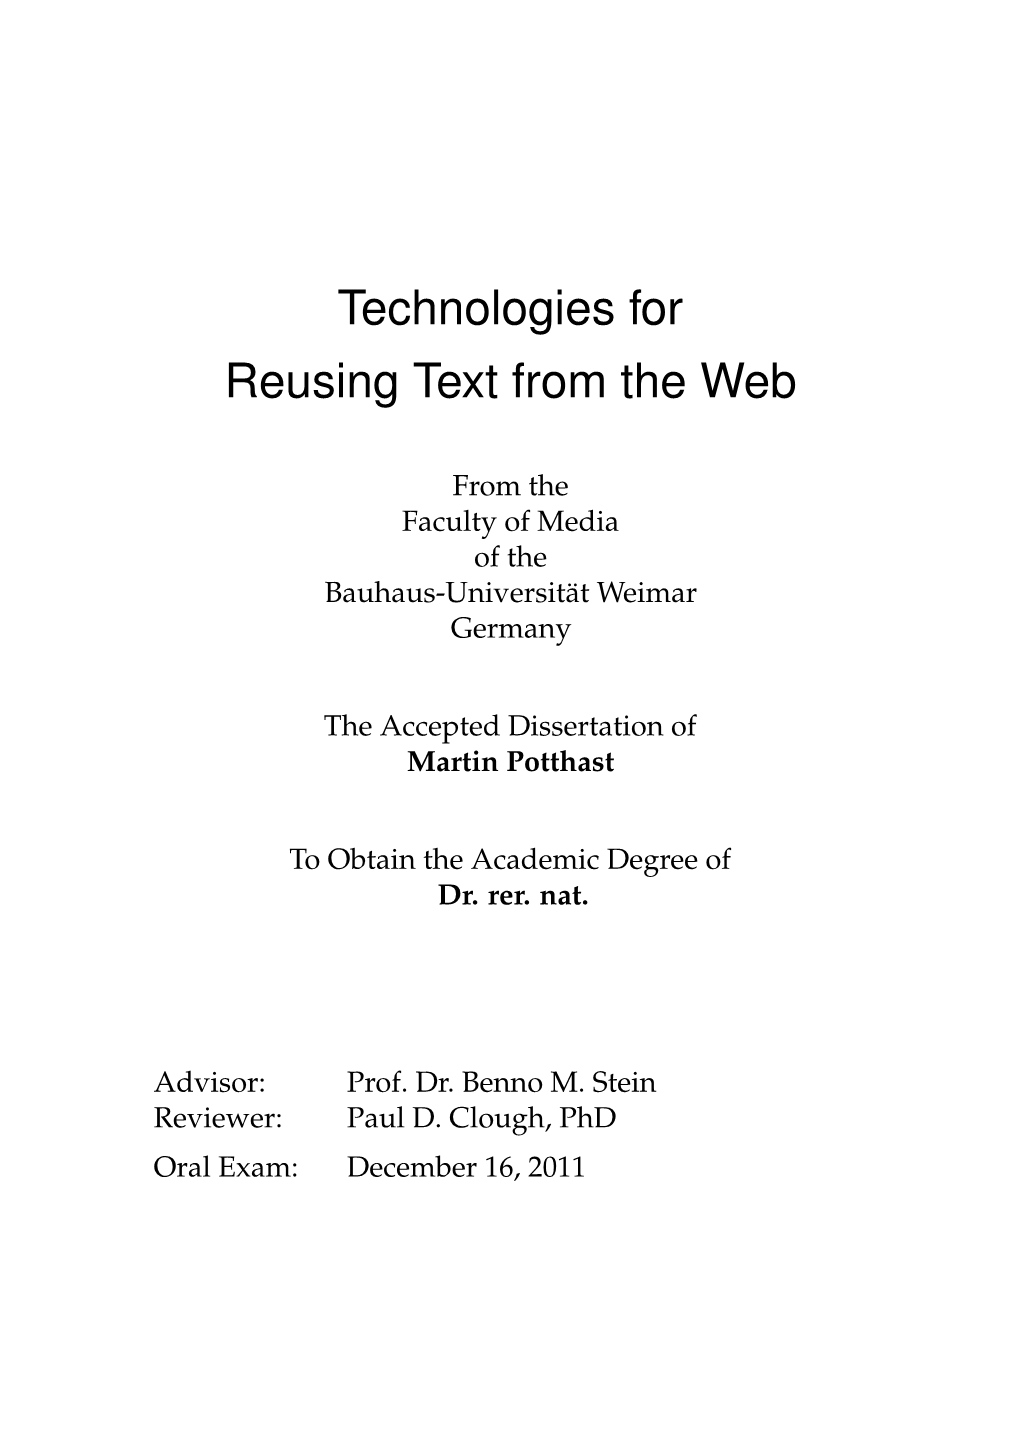 Technologies for Reusing Text from the Web